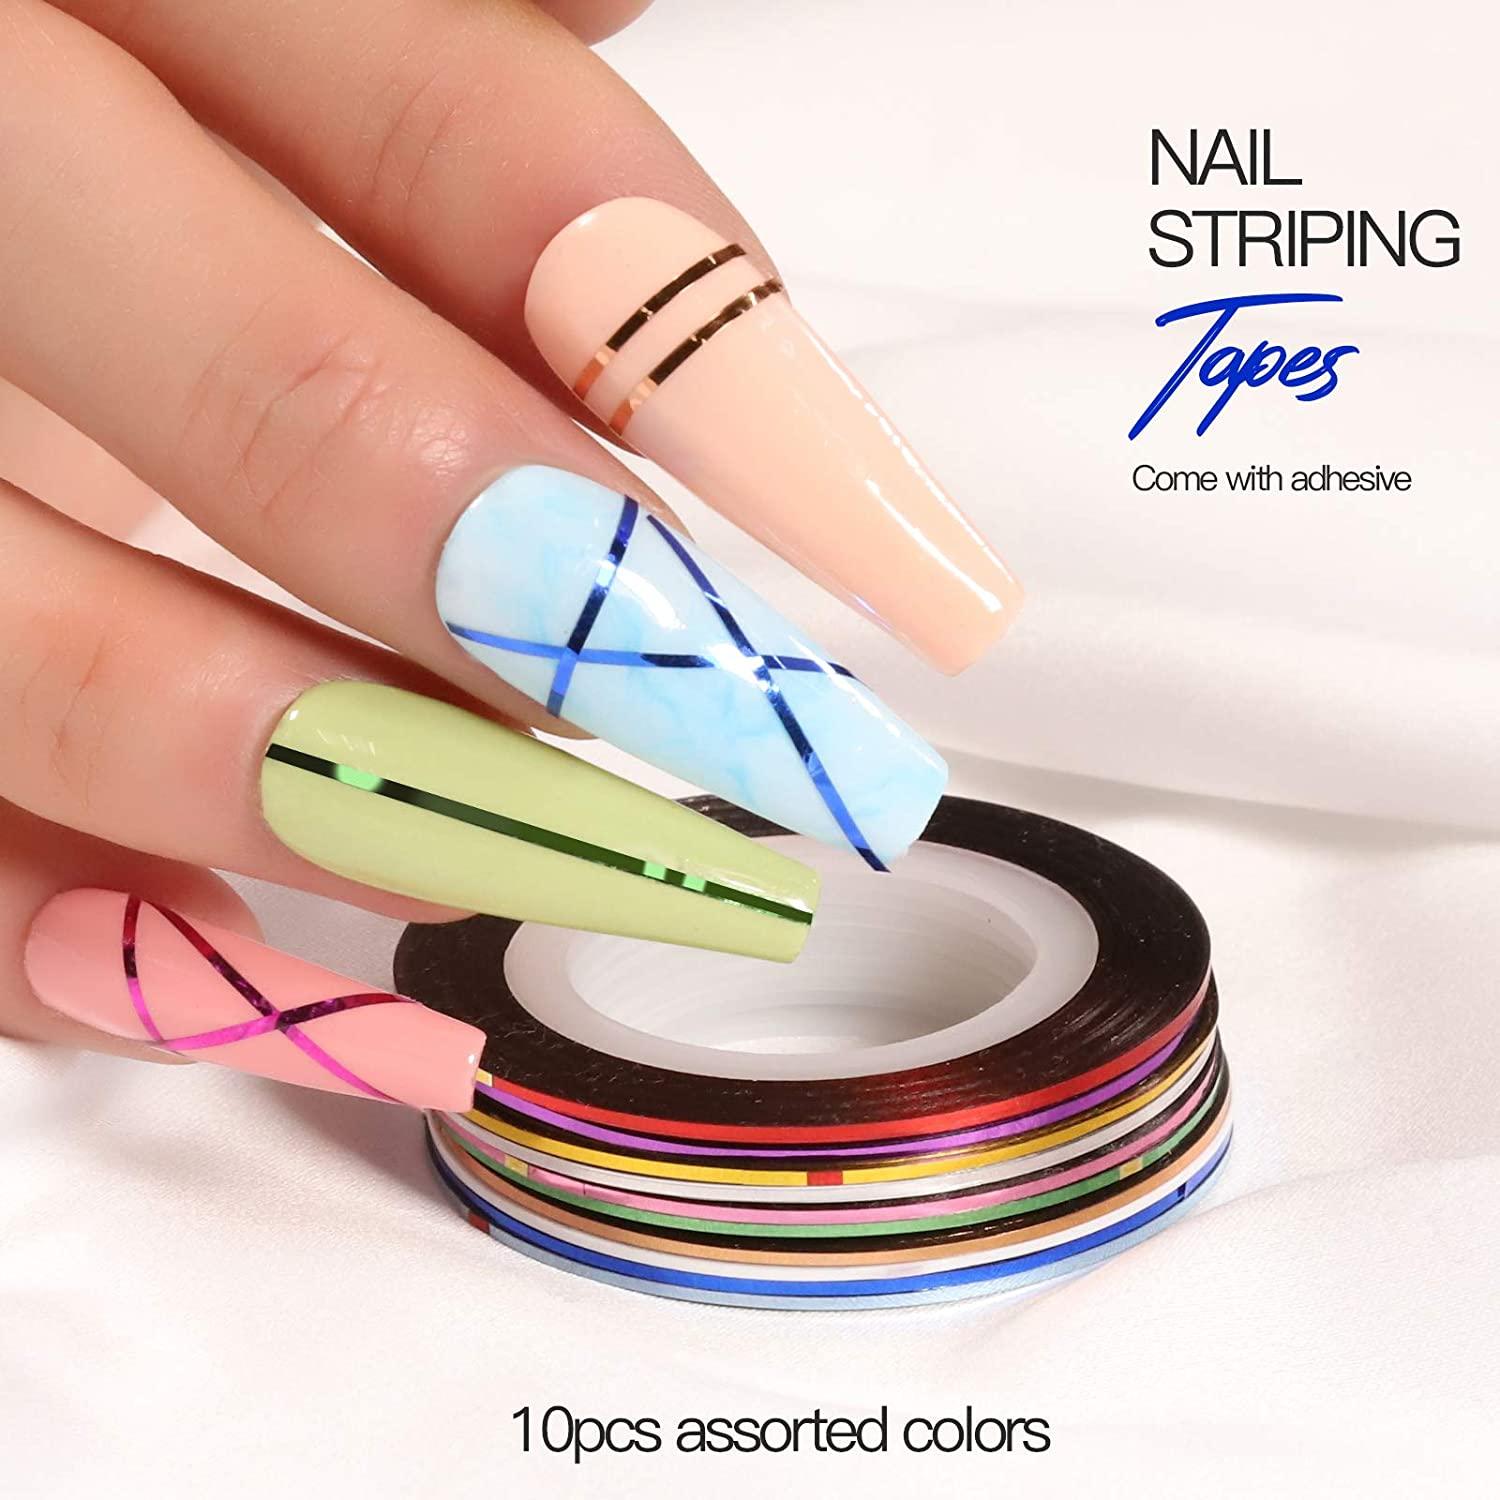 Nail Design Kit for Acrylic Nails Decoration with Nail Art Brushes